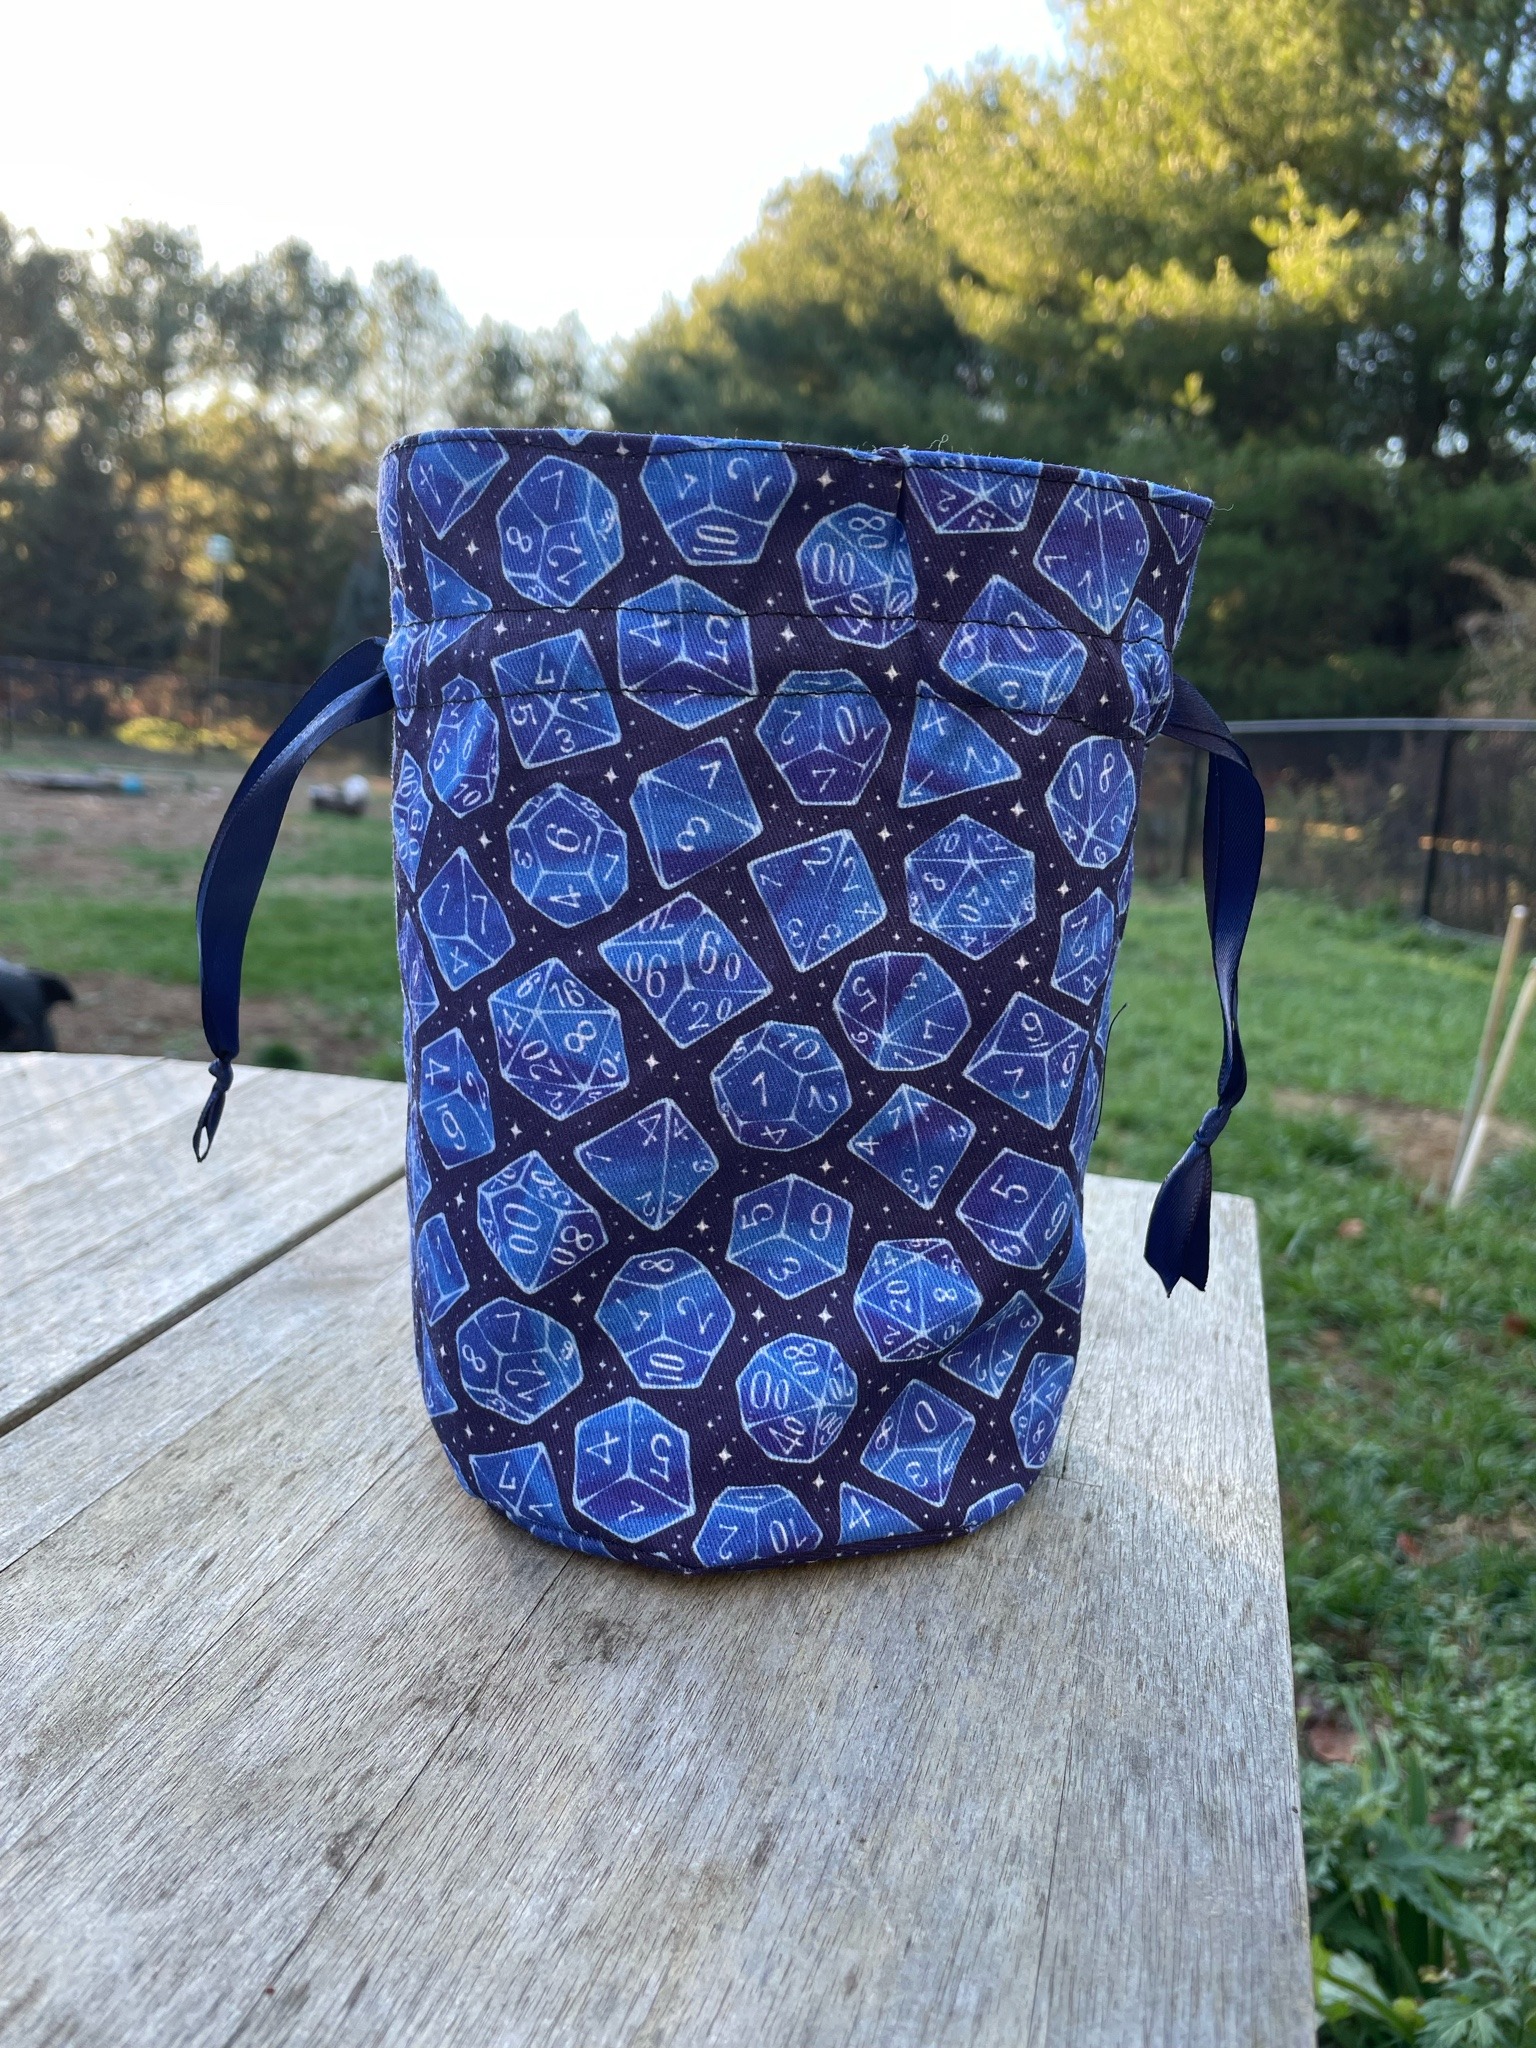 Porn Pics I made a dice bag from some cool custom fabric!